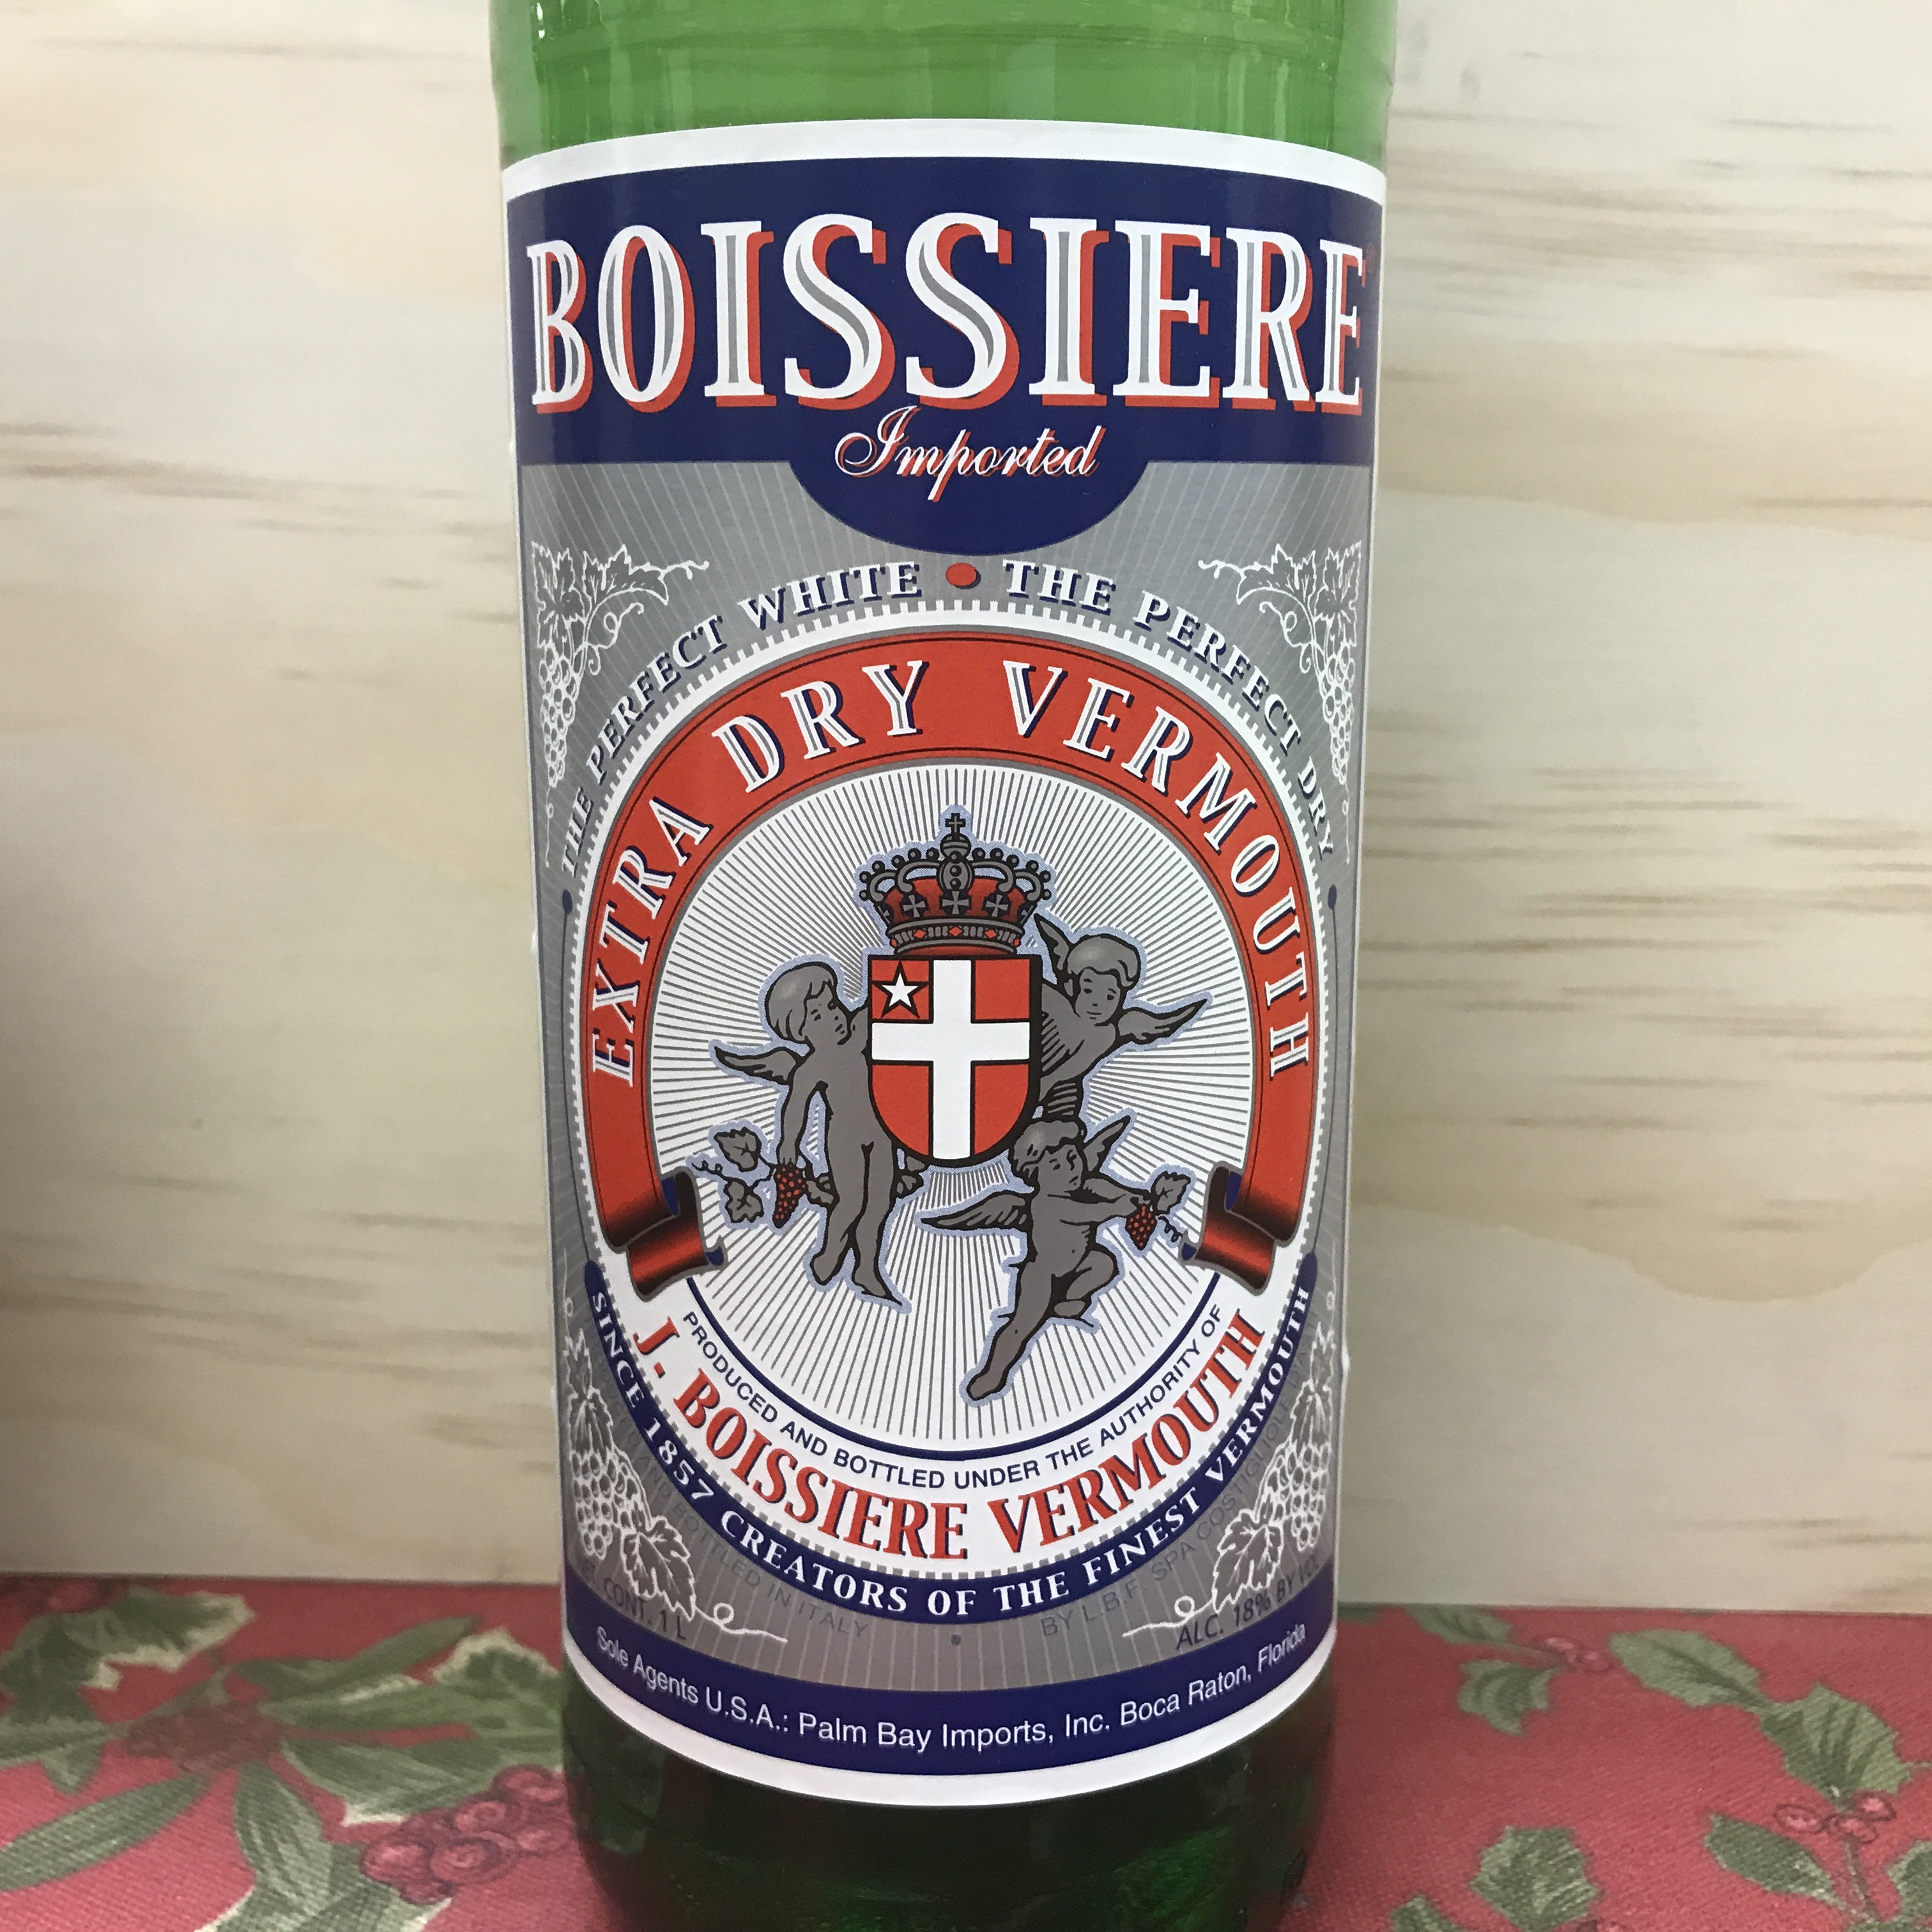 Boissiere Extra Dry Vermouth 1 liter